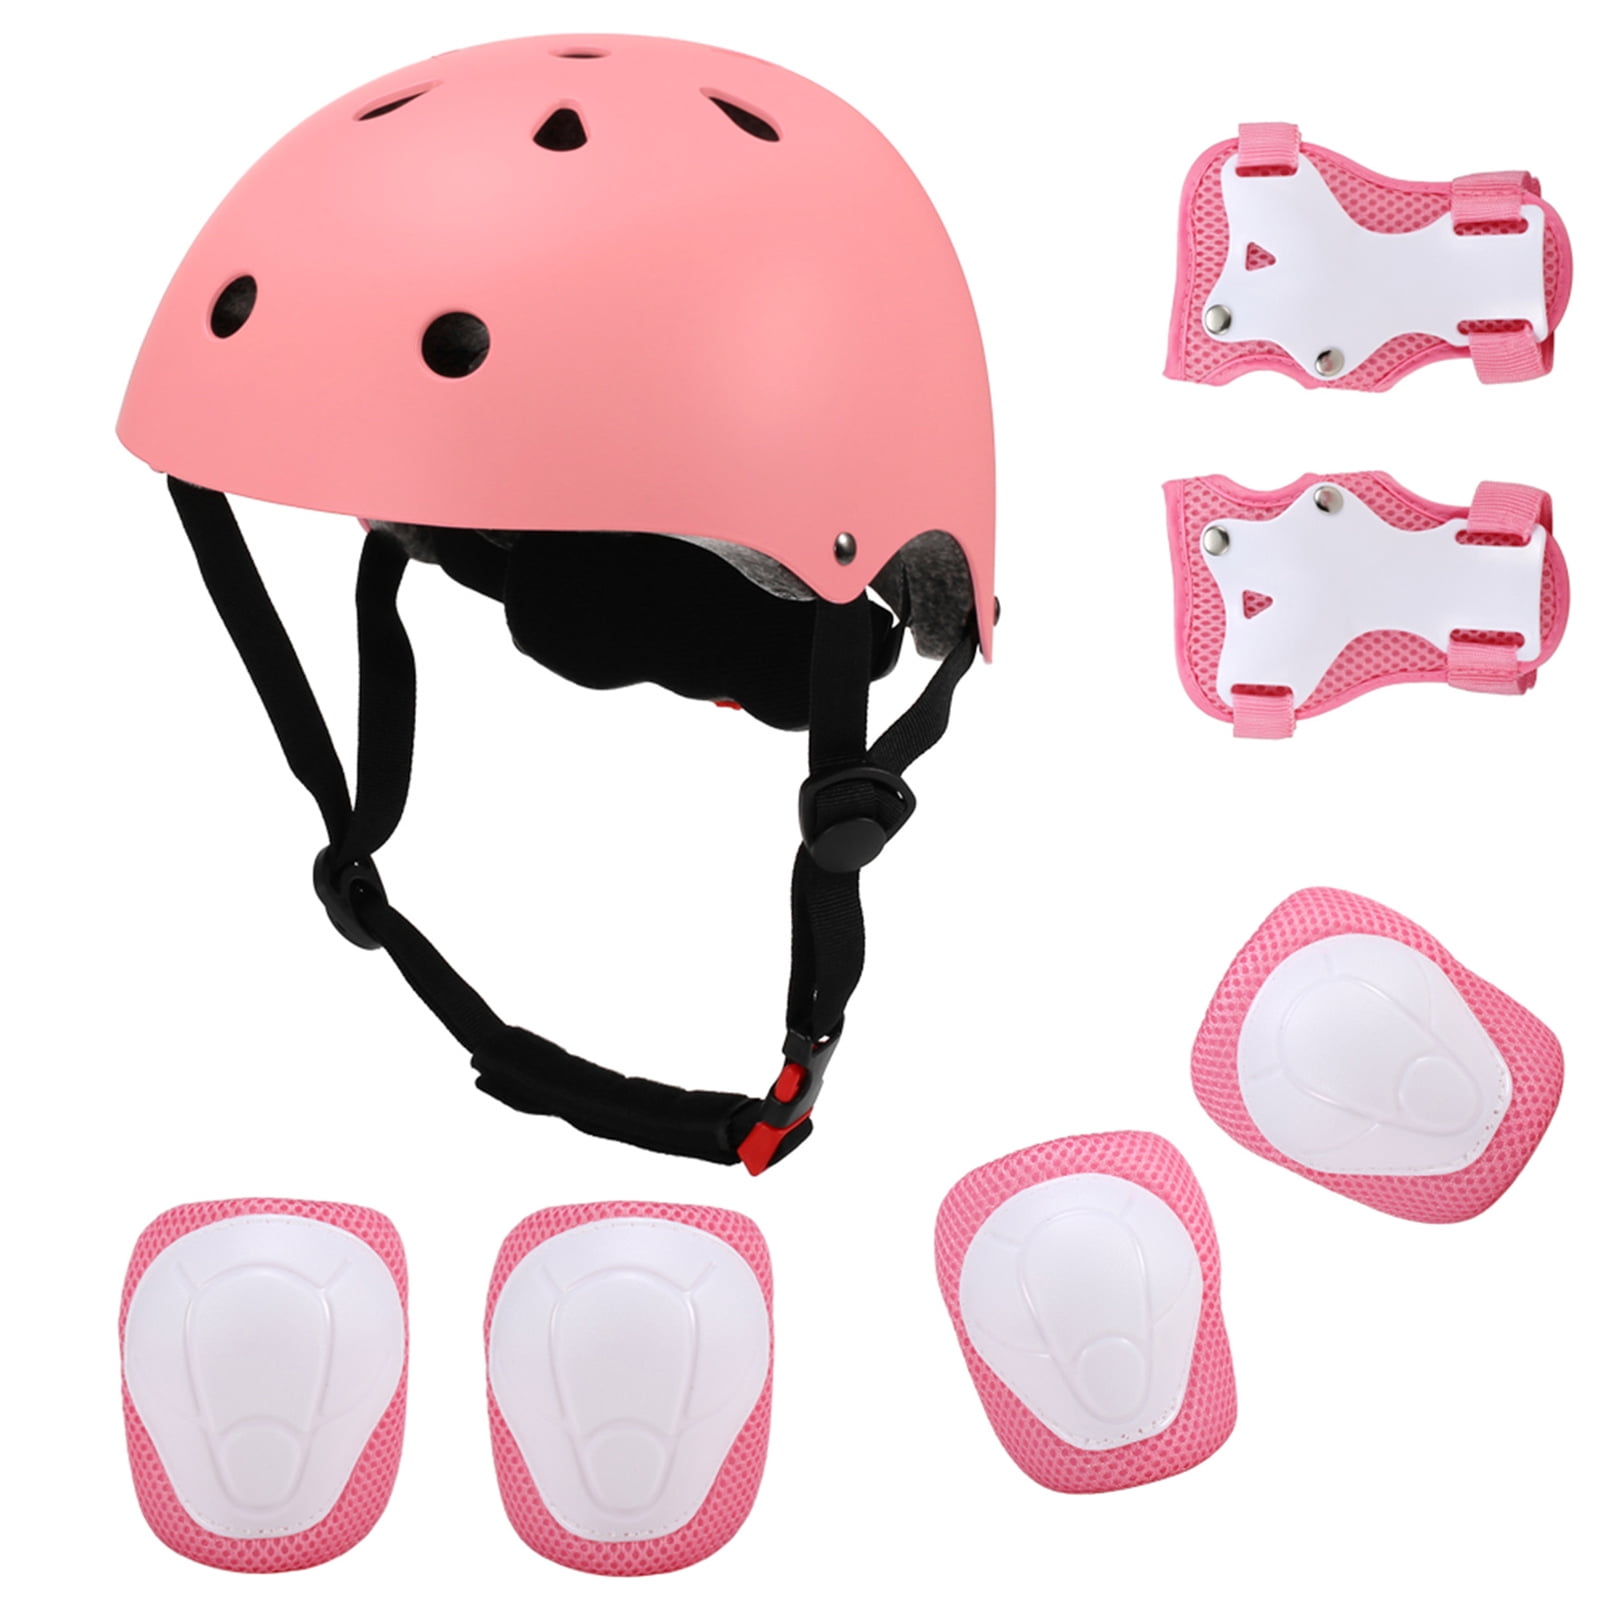 Oxelo Cycling Skating Guards Set of 4: Helmet, wrist, knee and elbow -  Sports Equipment - 1733672938